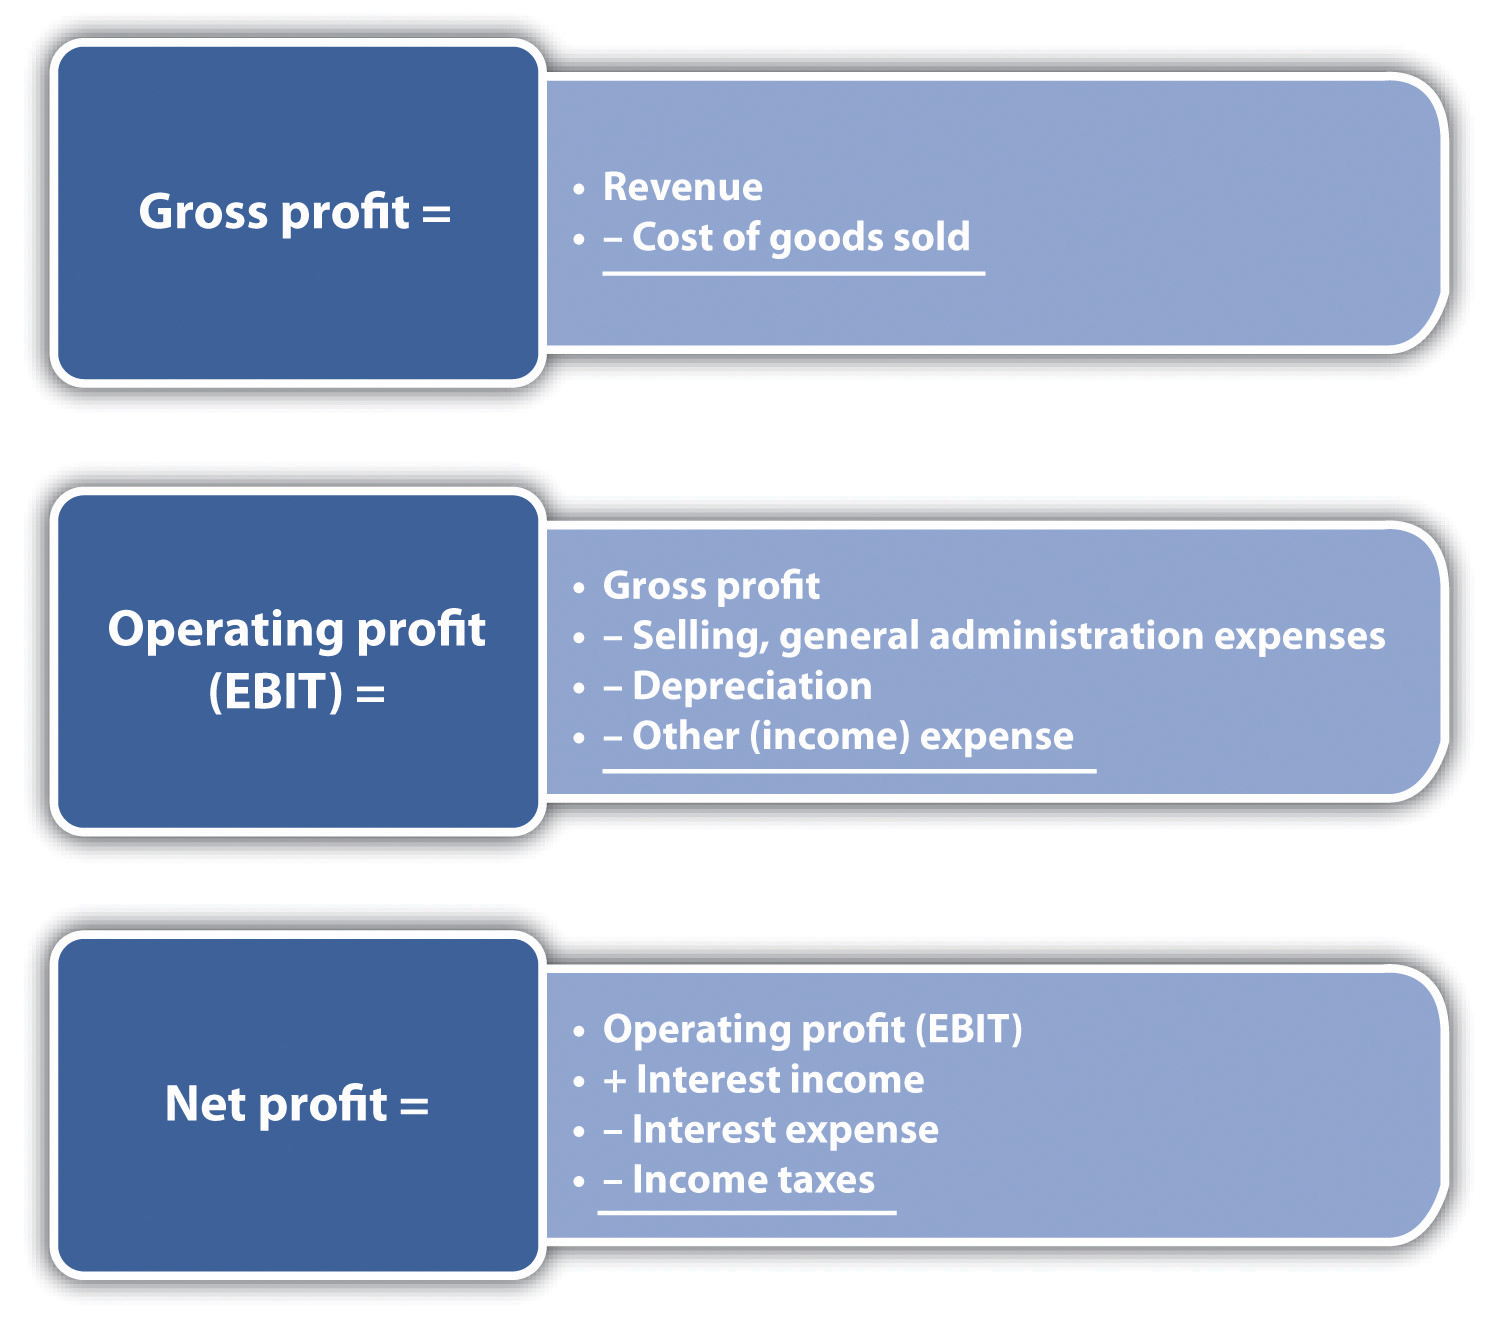 The income statement - gross profit, operating profit, and net profit